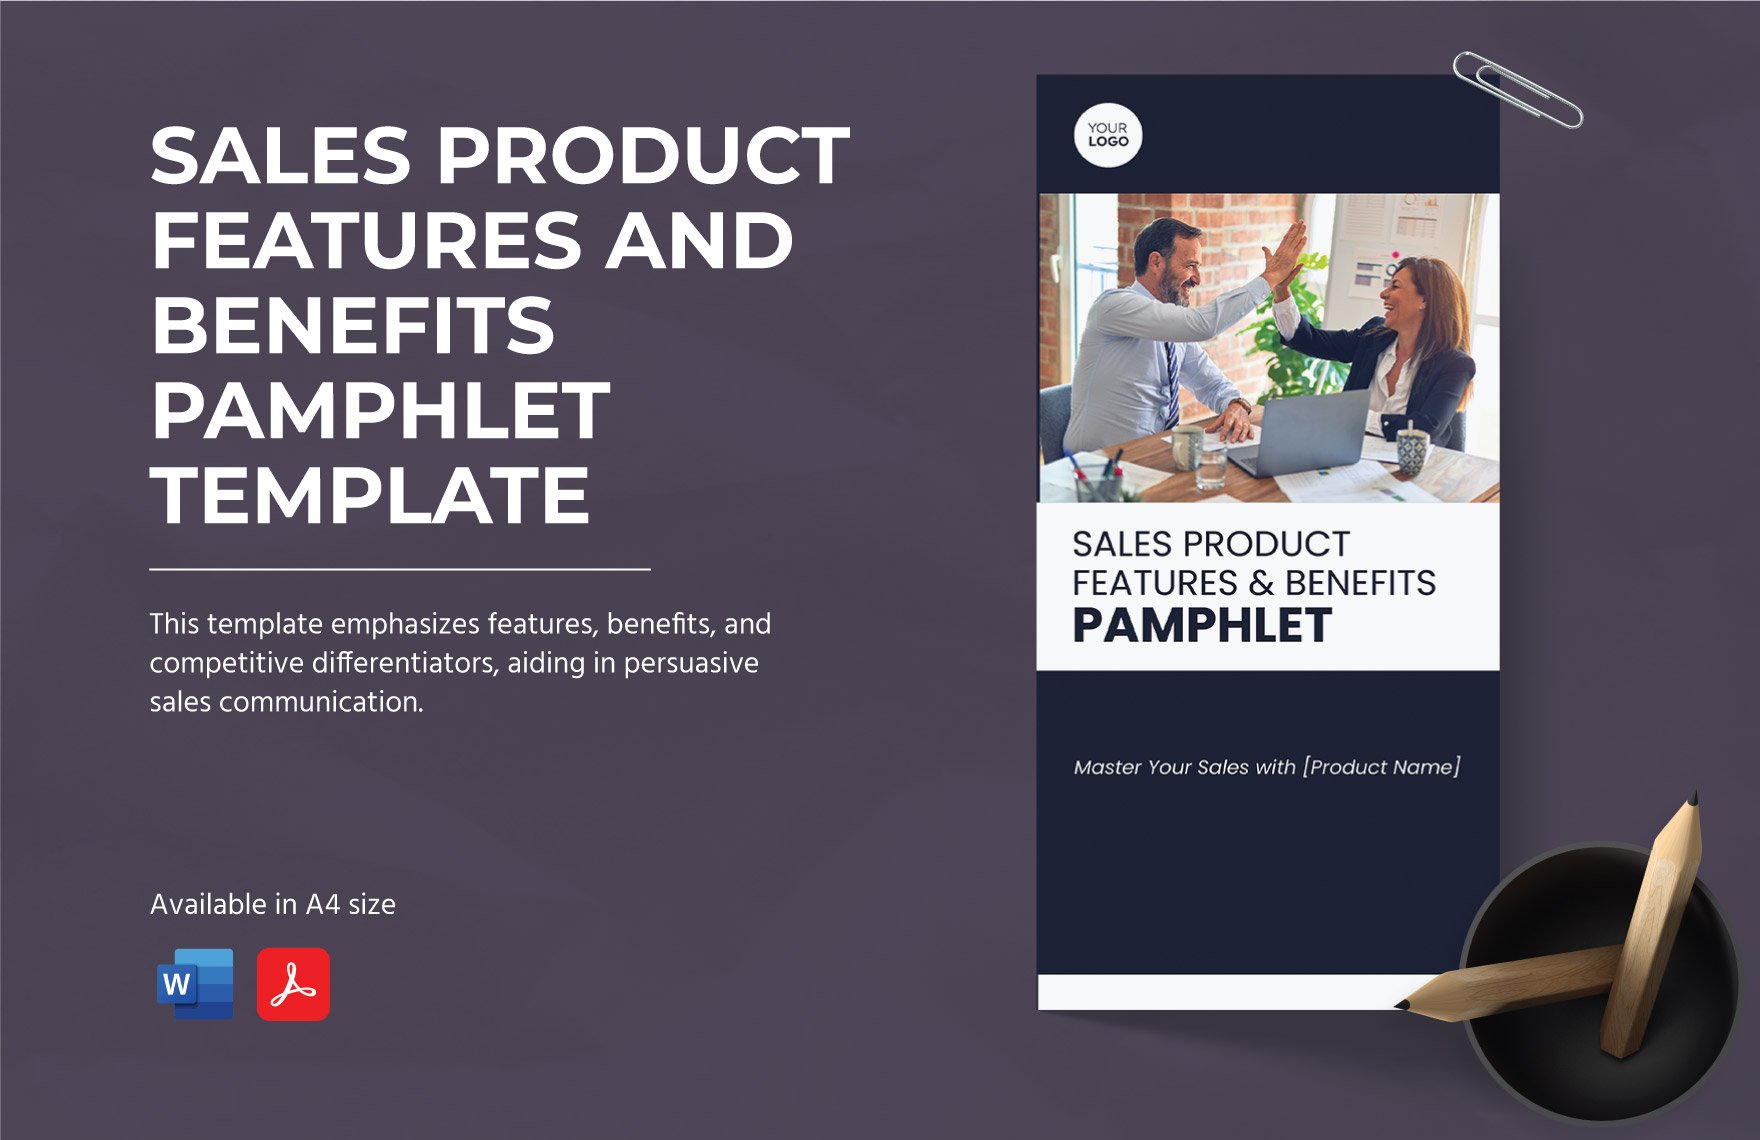 Sales Product Features and Benefits Pamphlet Template